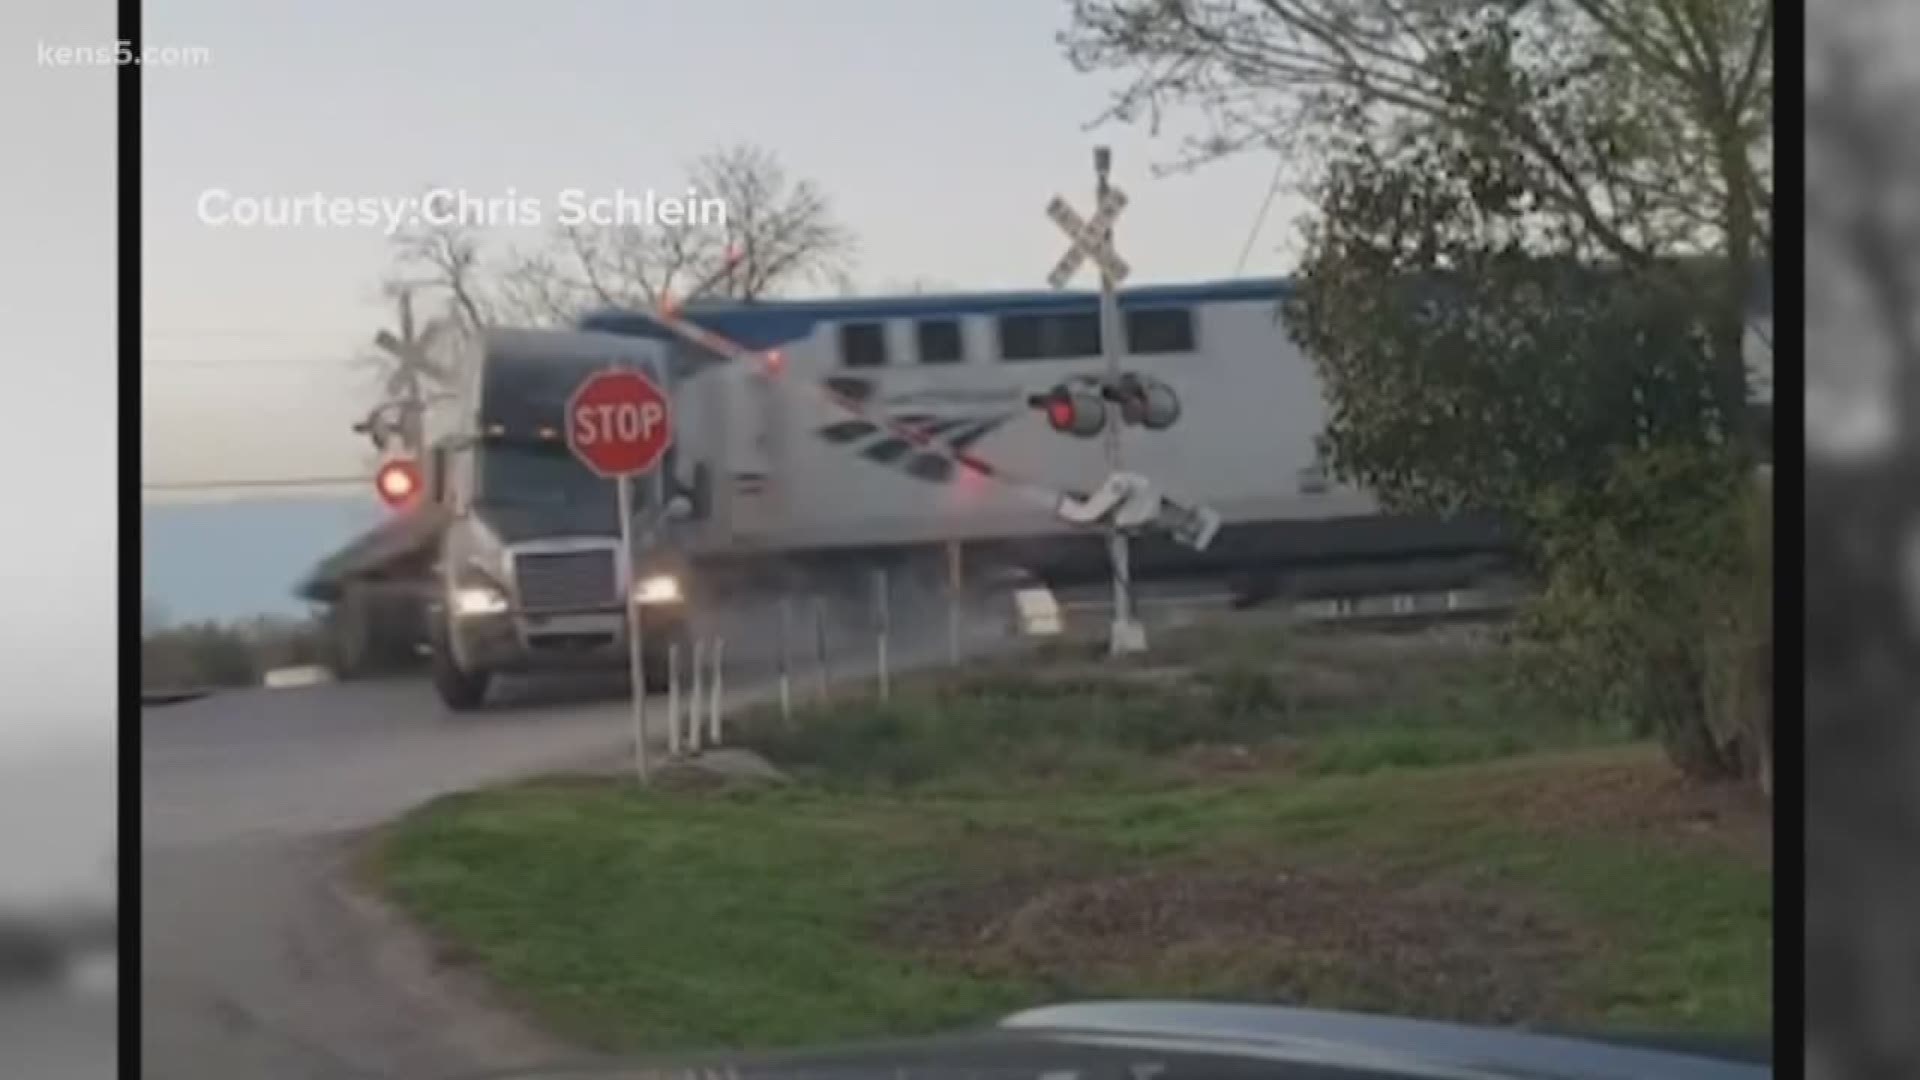 No one was injured in the incident, which occurred in Cibolo shortly before 8 a.m. According to Amtrak, there were 116 passengers on board.